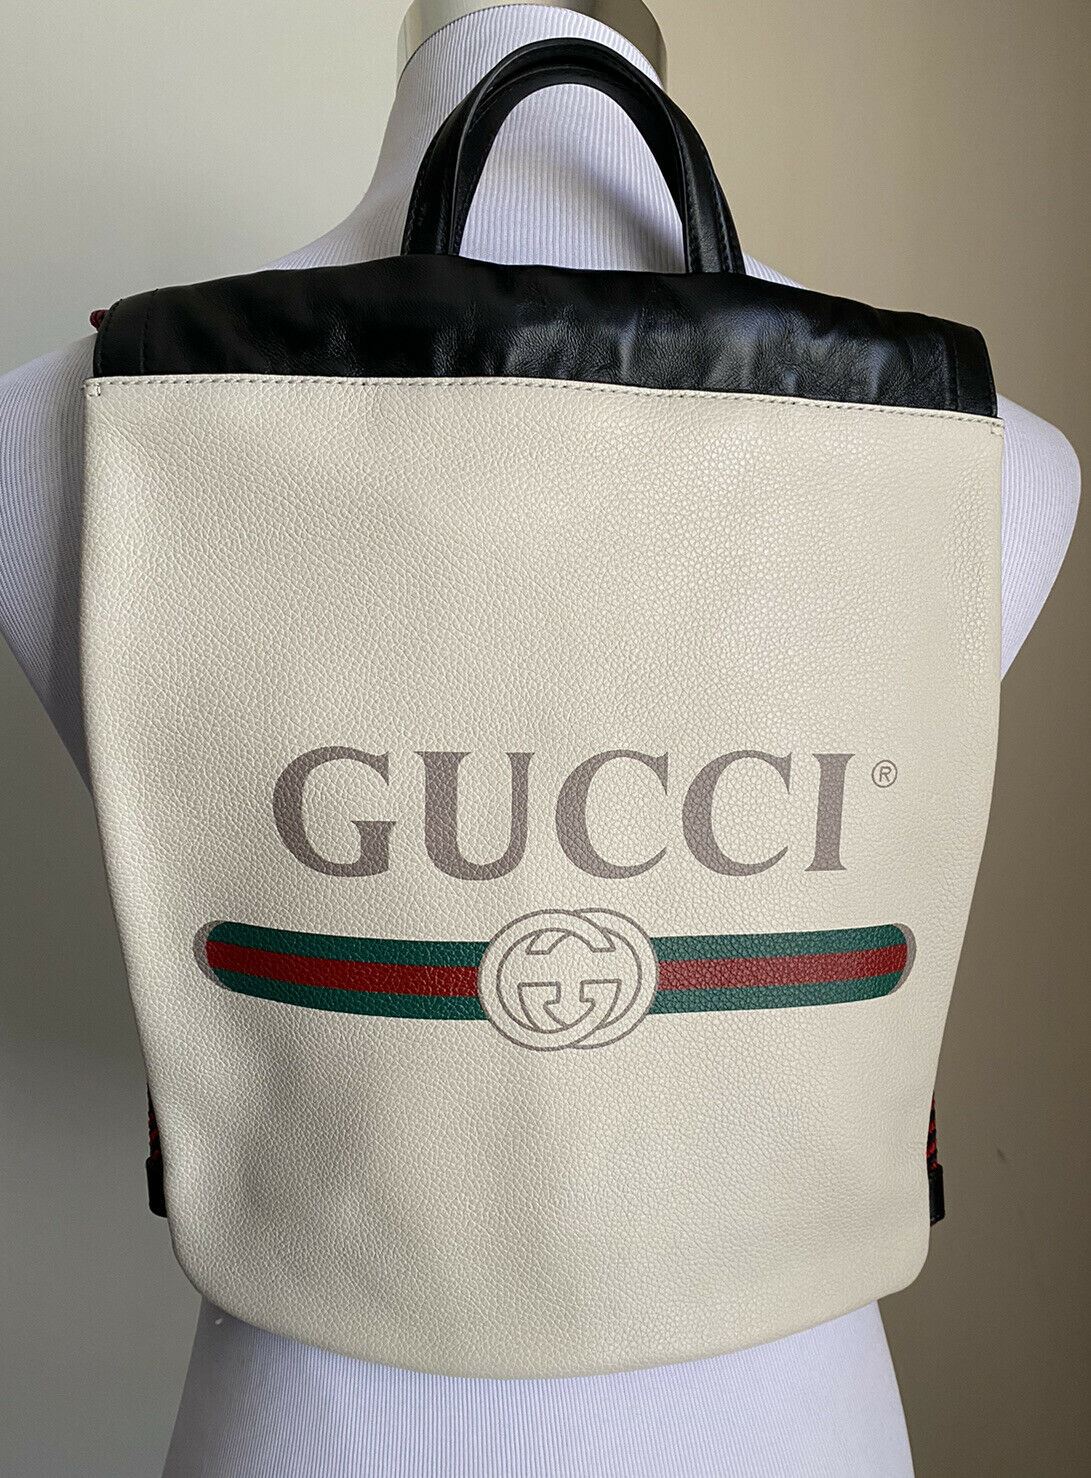 New Gucci GG Monogram Leather Backpack Bag  Tan/Black 523586 Italy